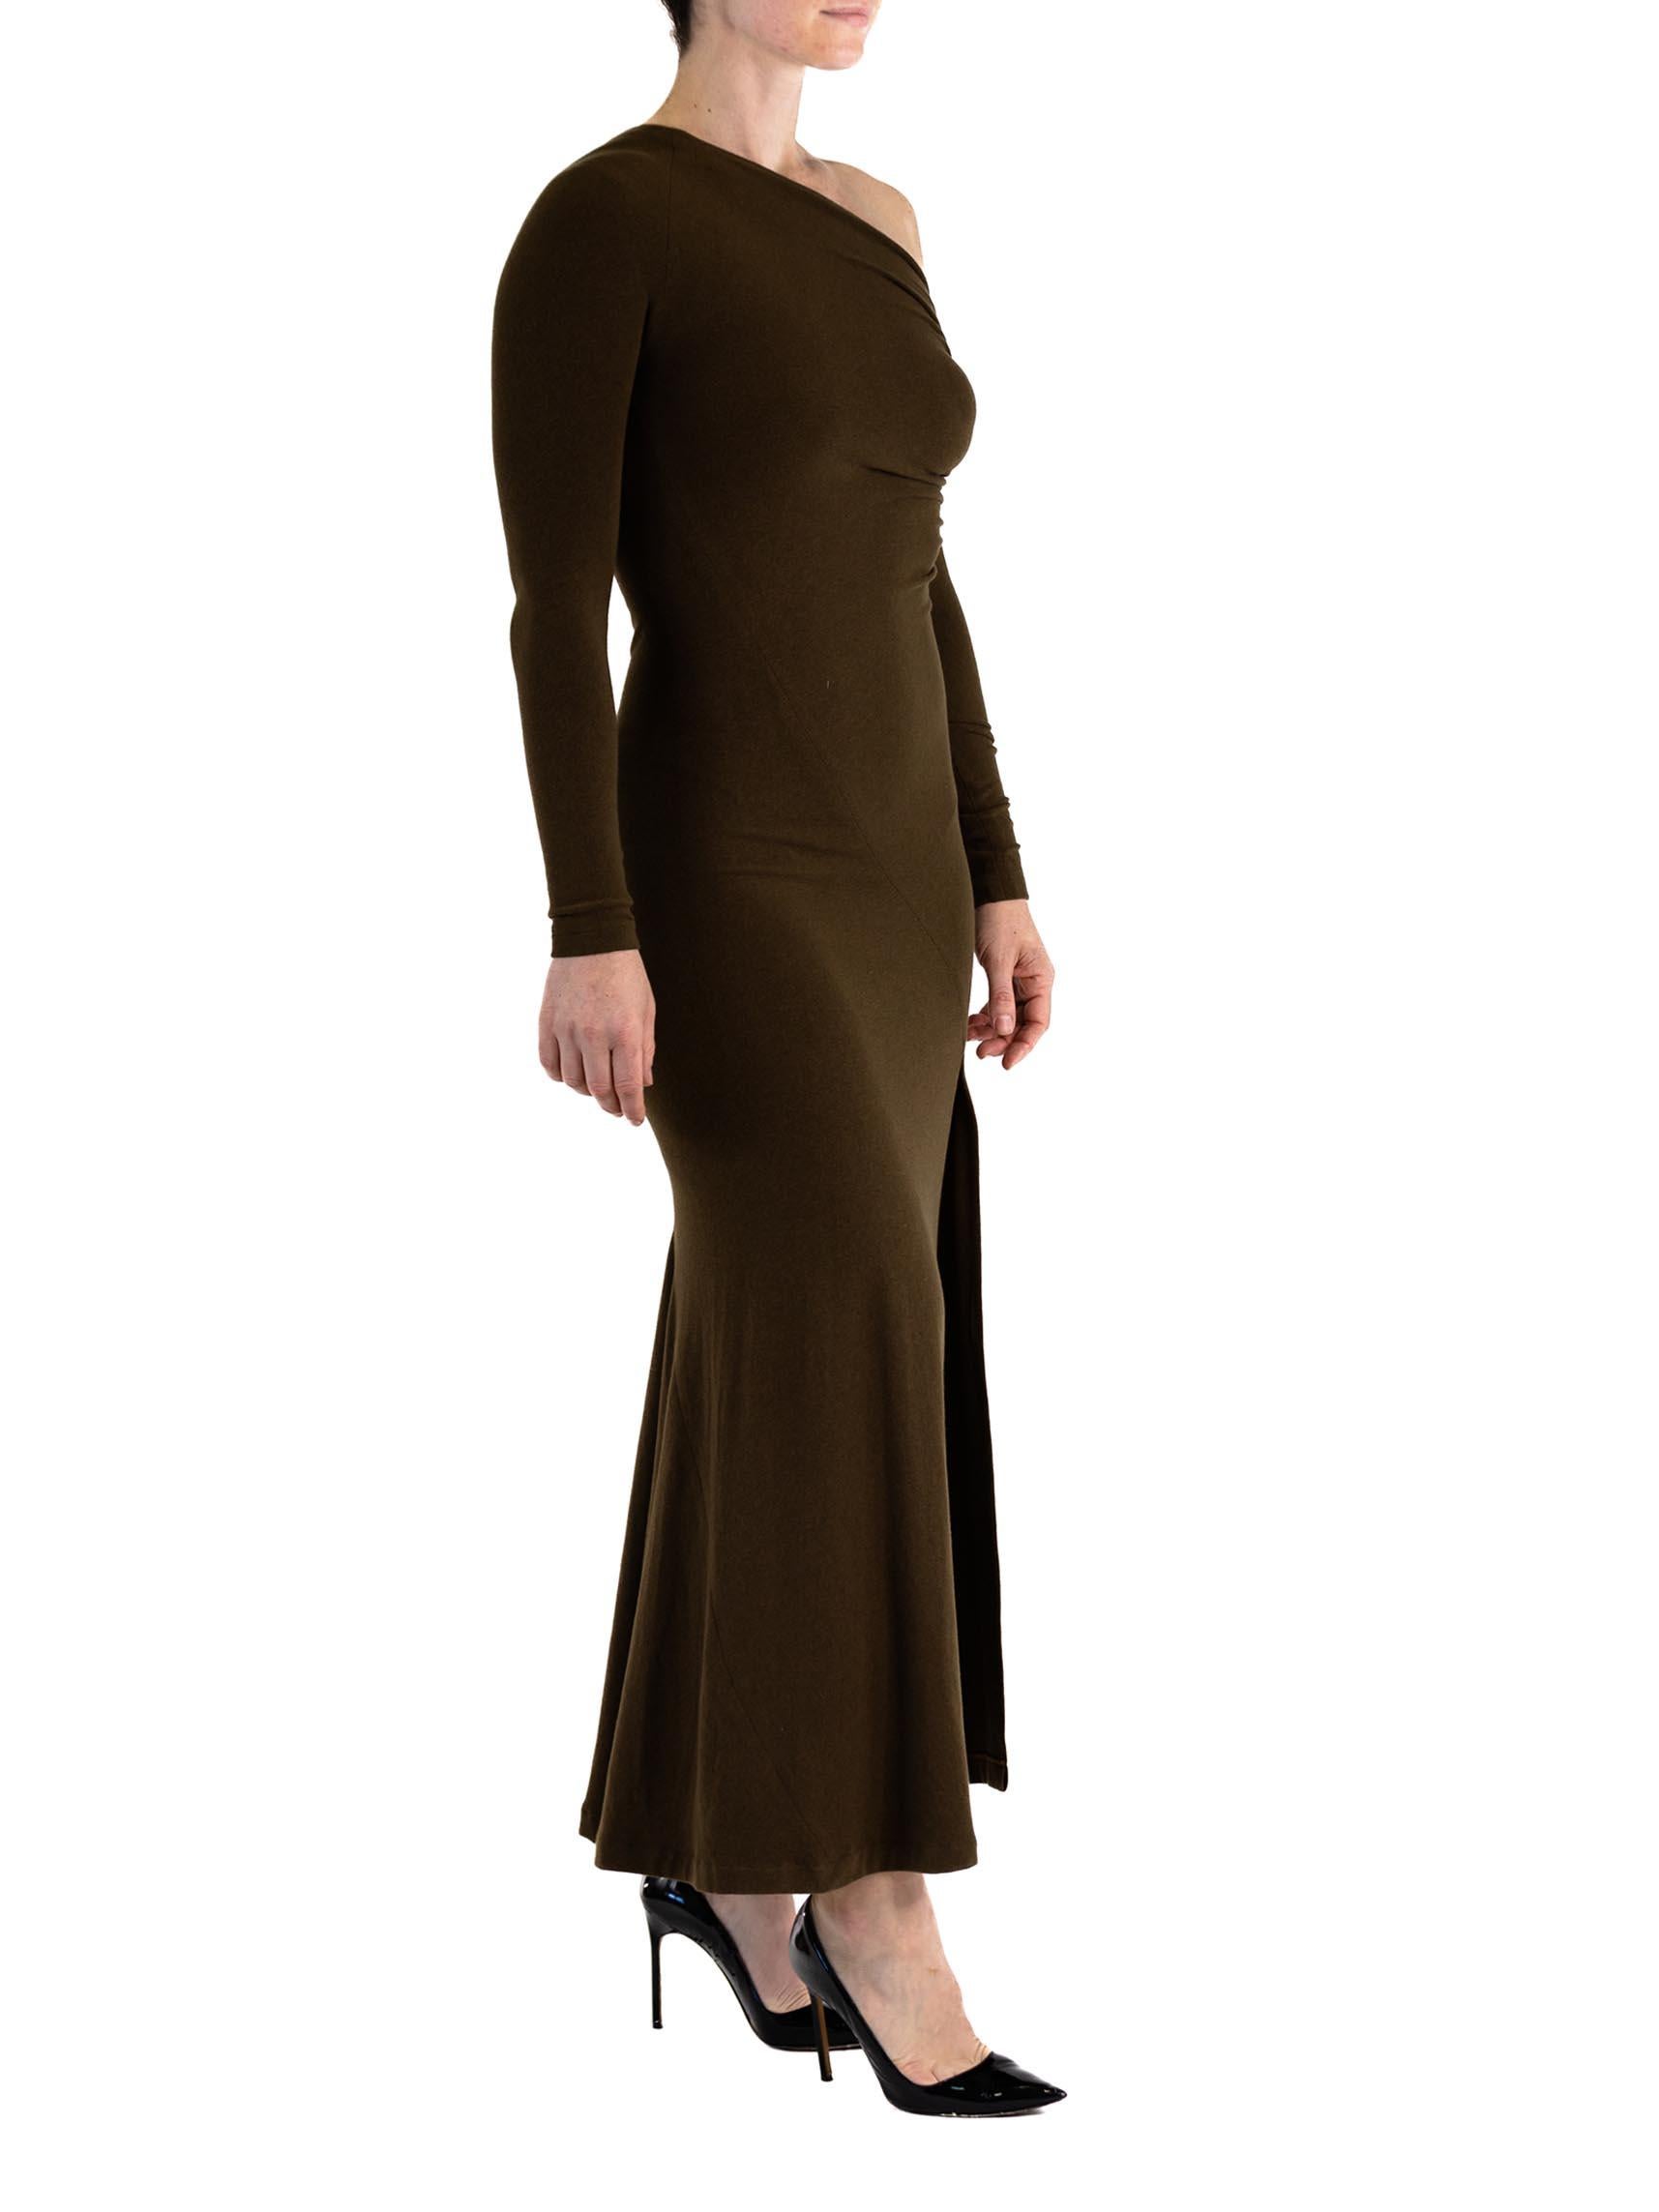 1990S DONNA KARAN Brown Rayon Blend Jersey Assymtetrical Neckline Ruched Gown W In Excellent Condition For Sale In New York, NY